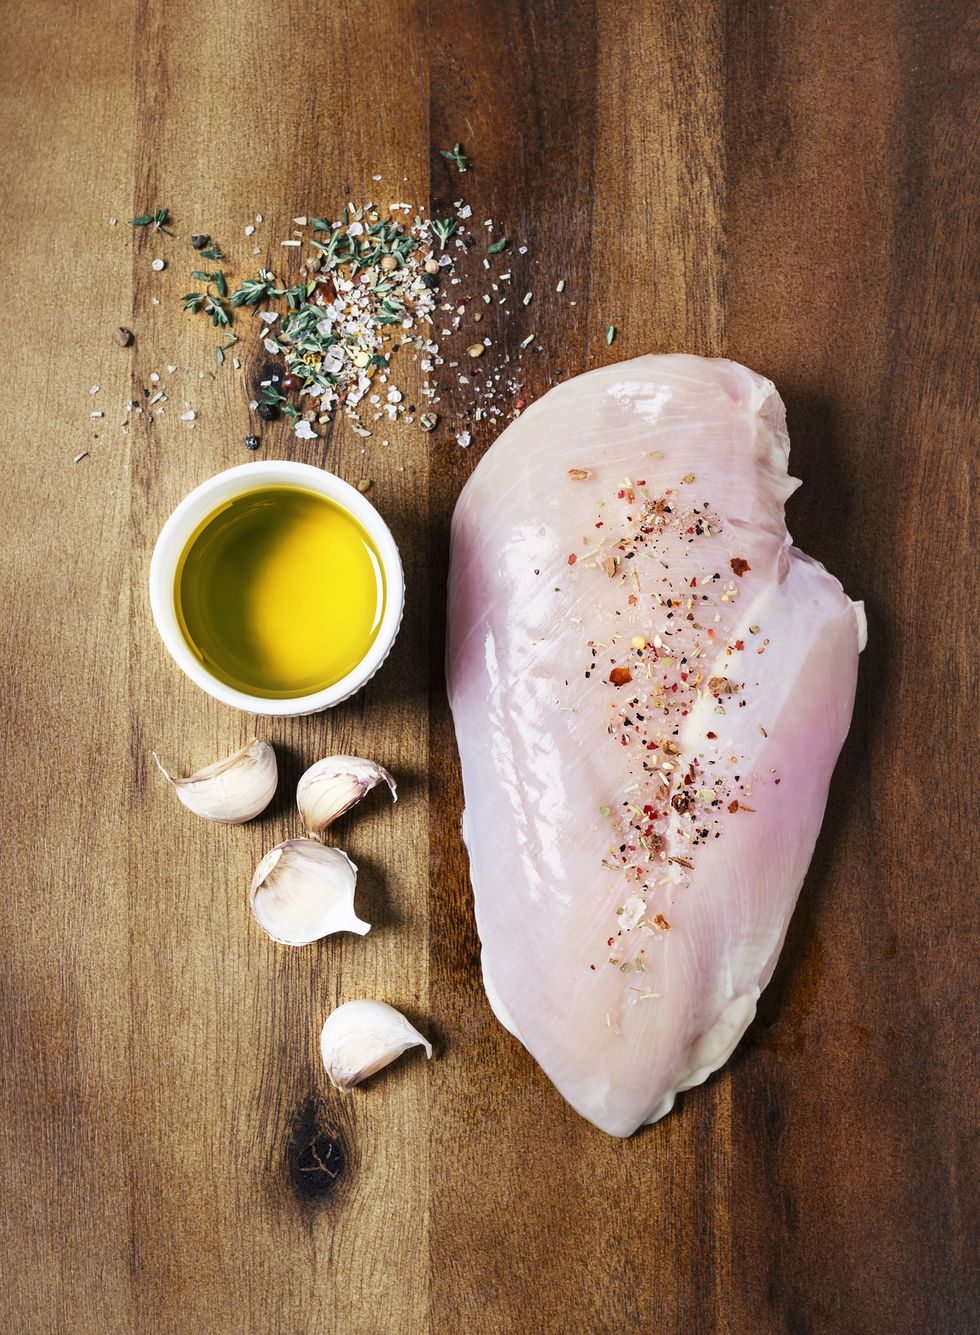 chicken breast with olive oil, garlic, and spices on wooden background